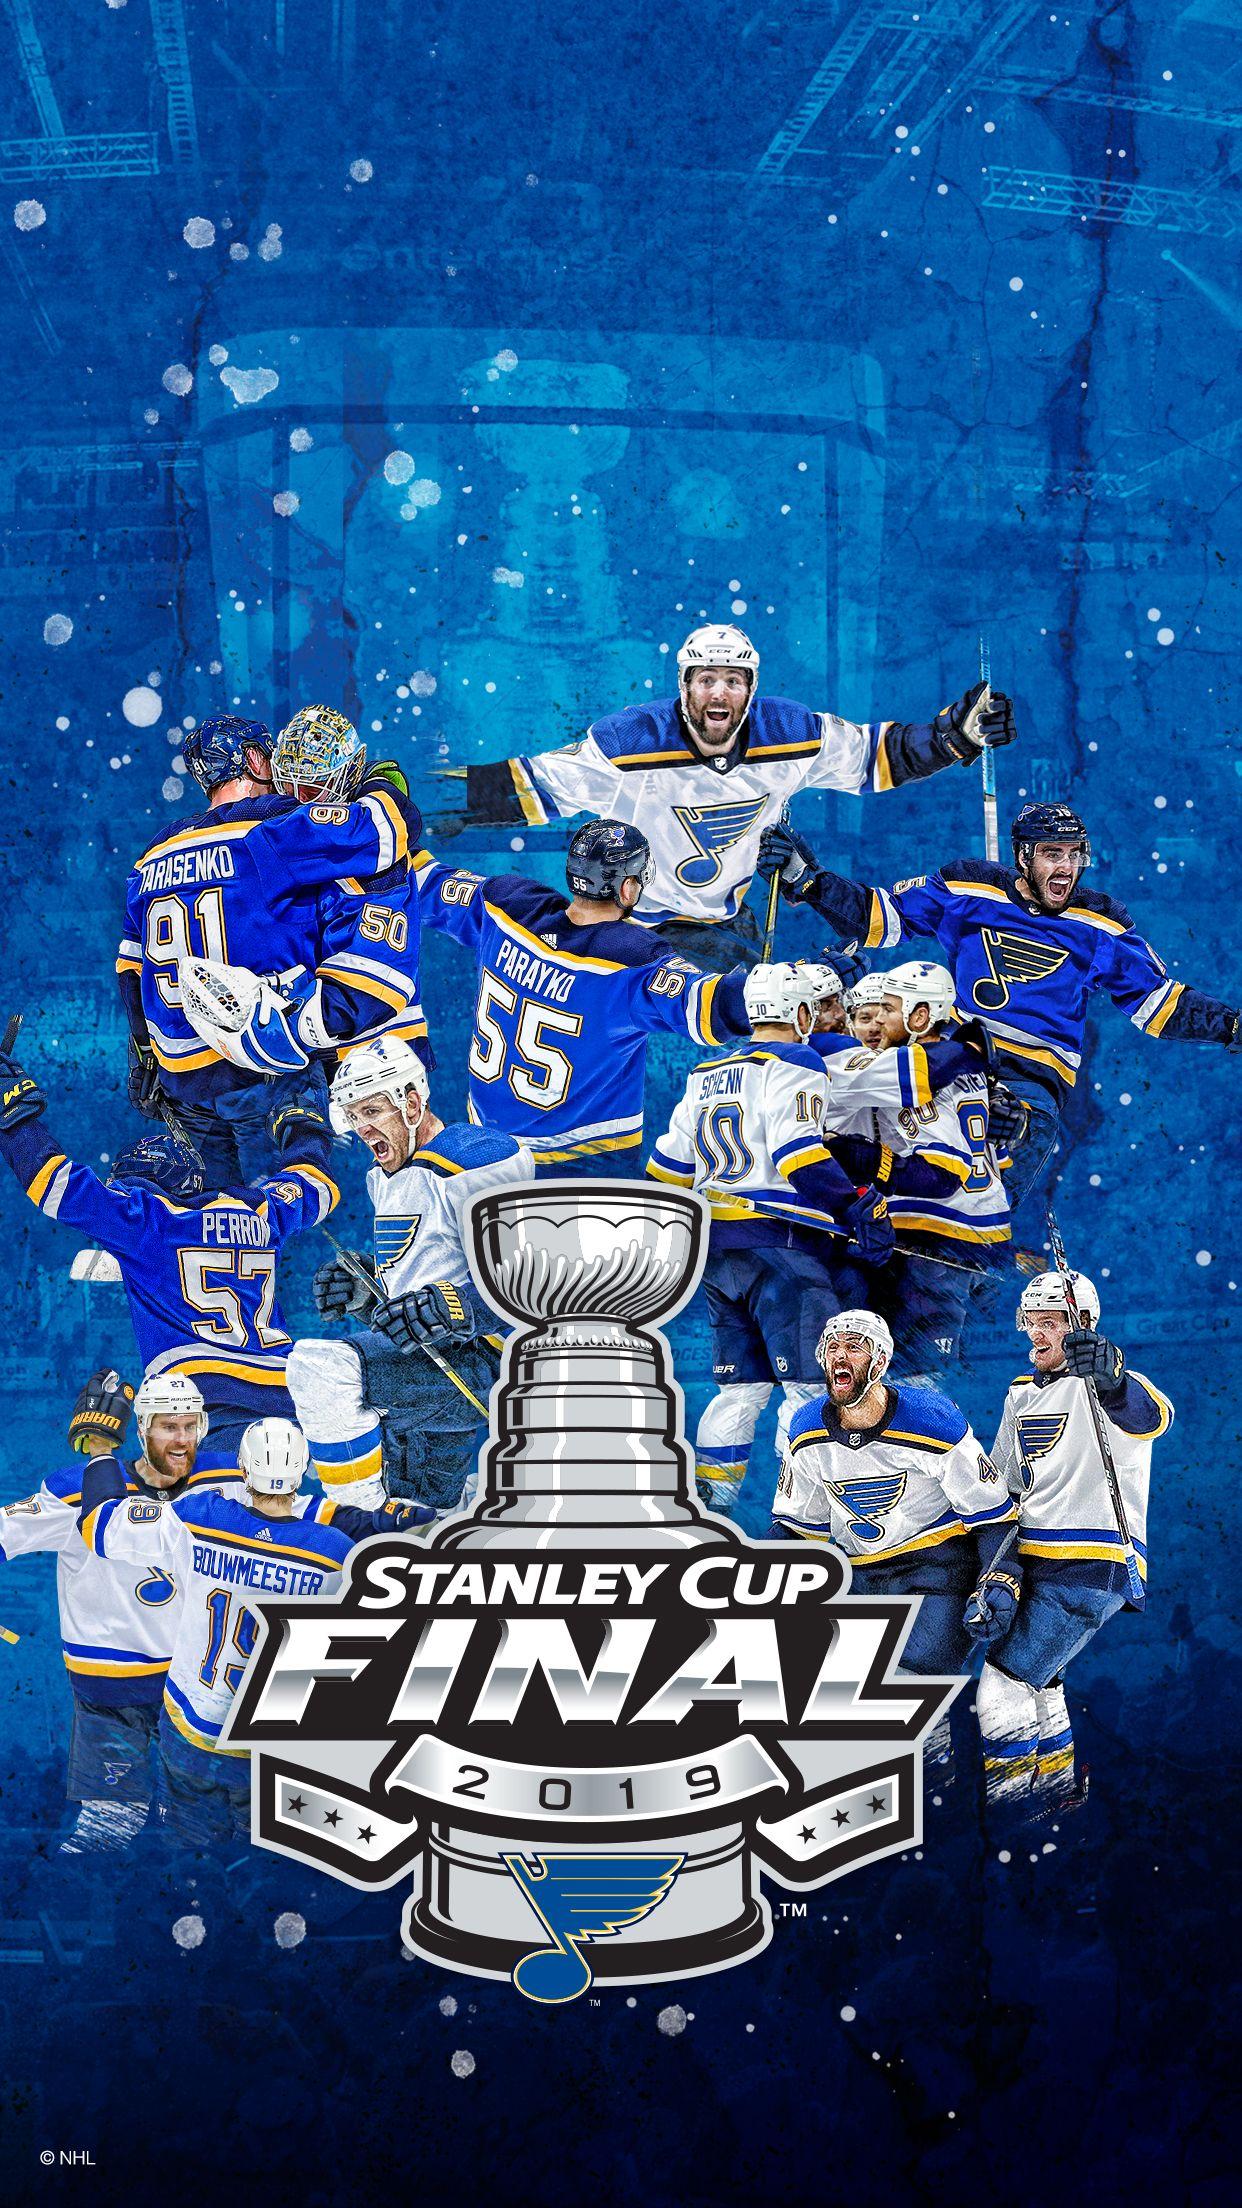 St. Louis Blues Wallpapers - Top Free